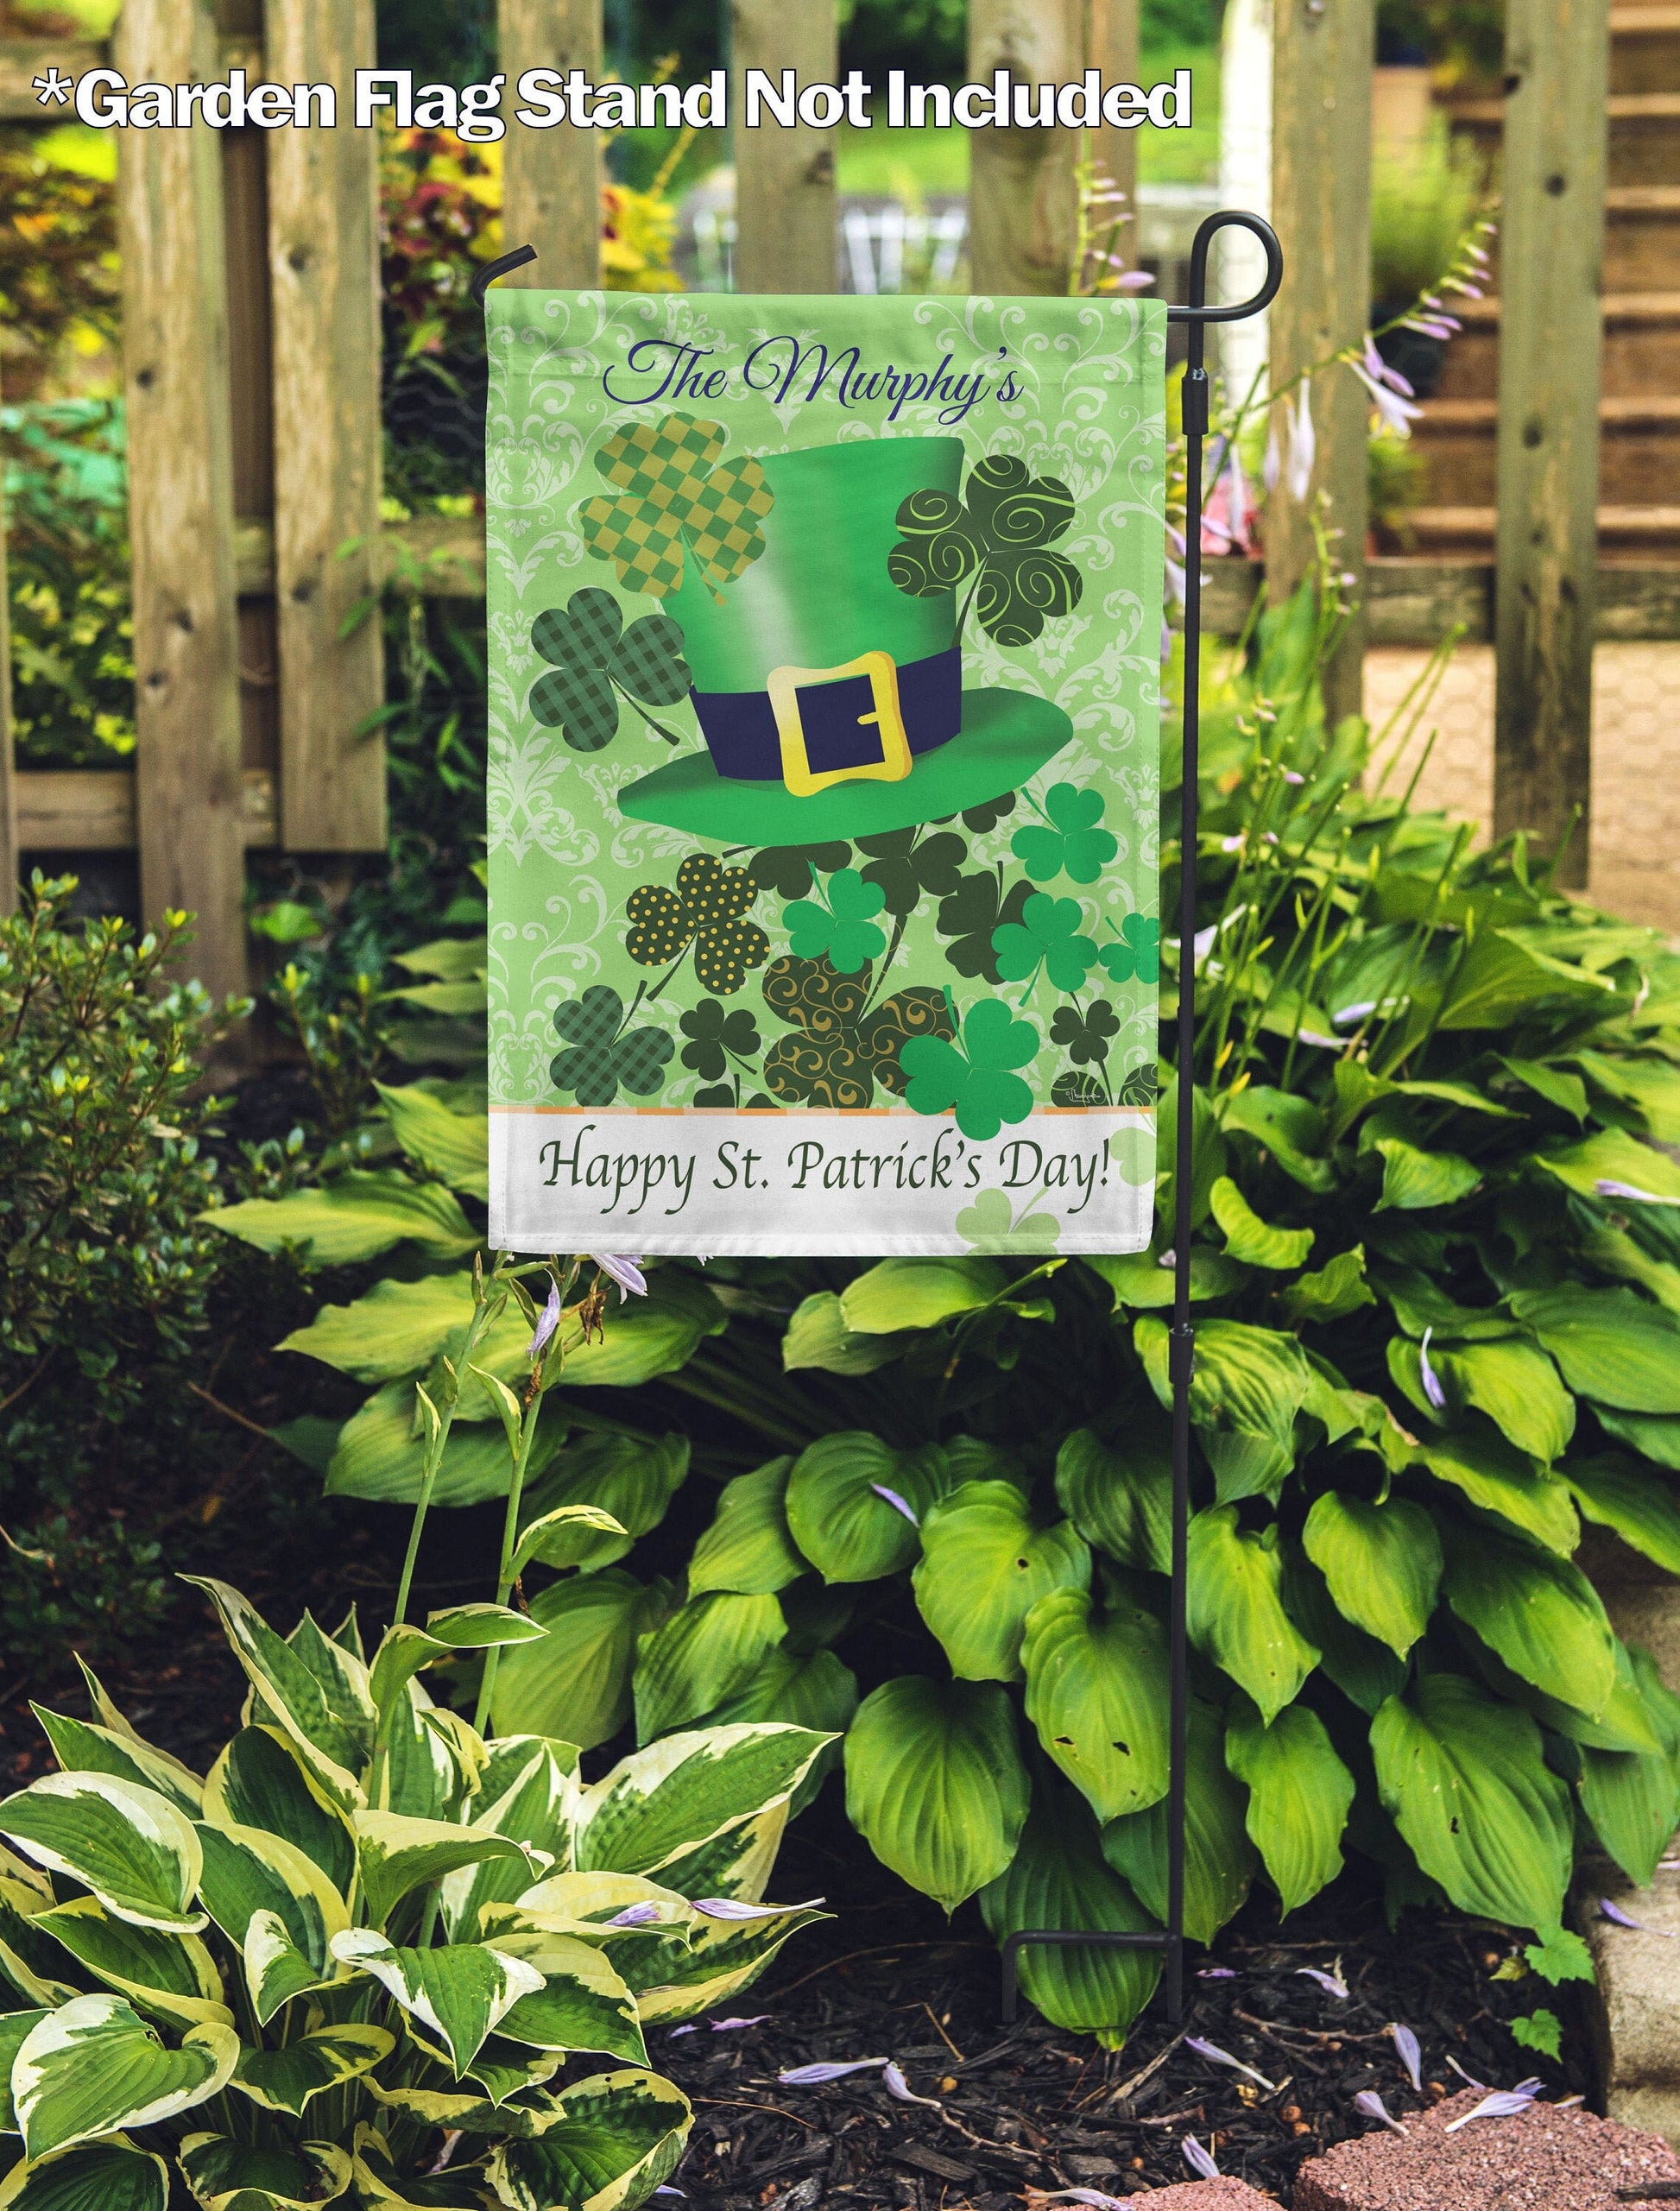 Happy St. Patrick's Day Gnome Personalized House Flag - St. Patrick's Day Garden Flag - St. Patrick's Day Decorative Flags